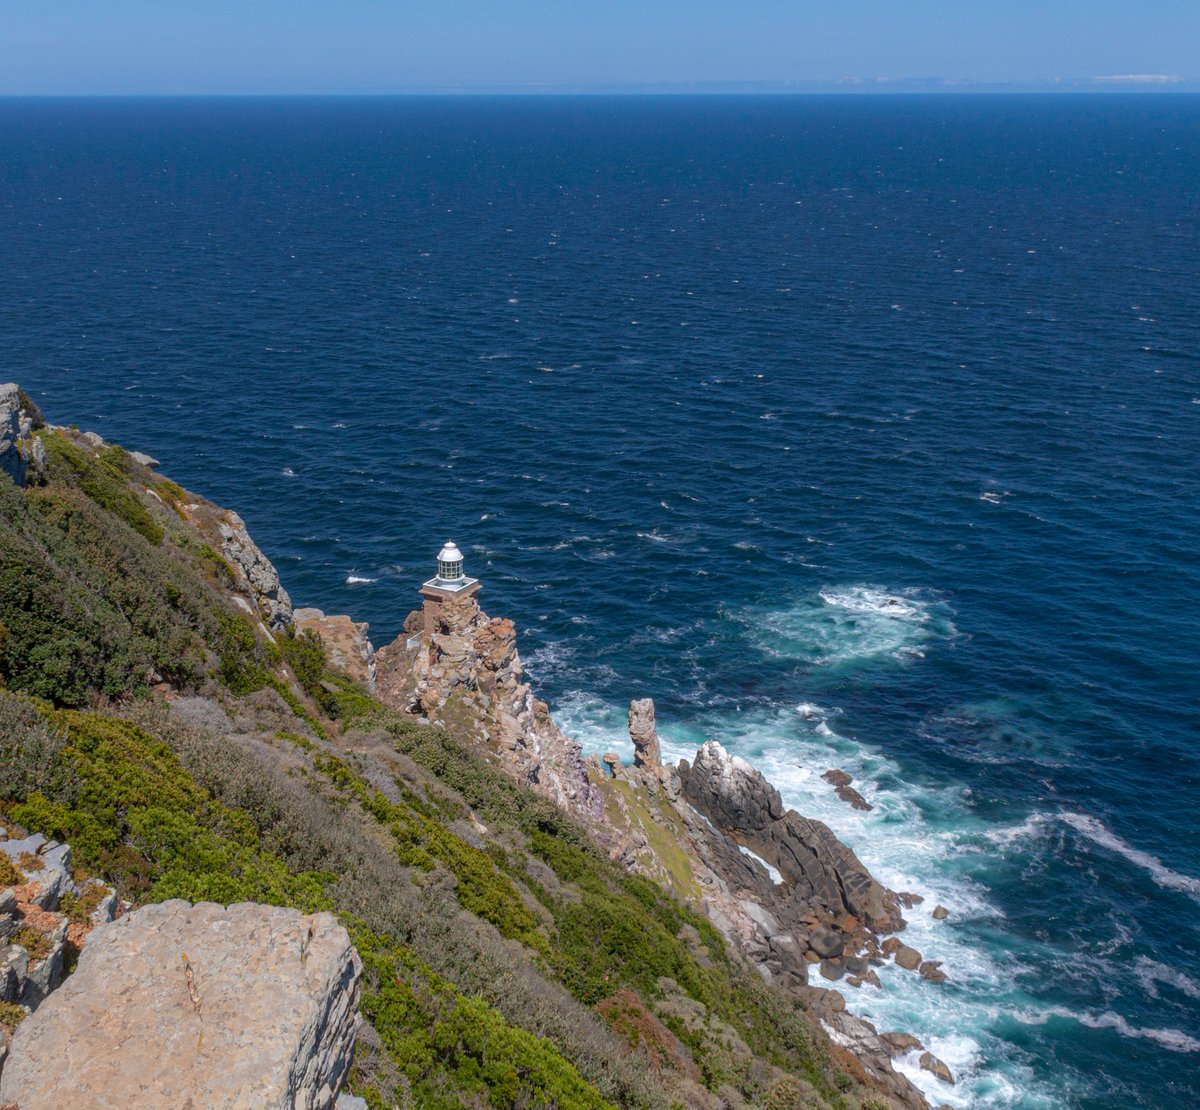 'Extremus'. Cape of Good Hope, South Africa. #365in2023dailyprompt #365in2023 #CapeofGoodHope #SouthAfrica #lighthouse